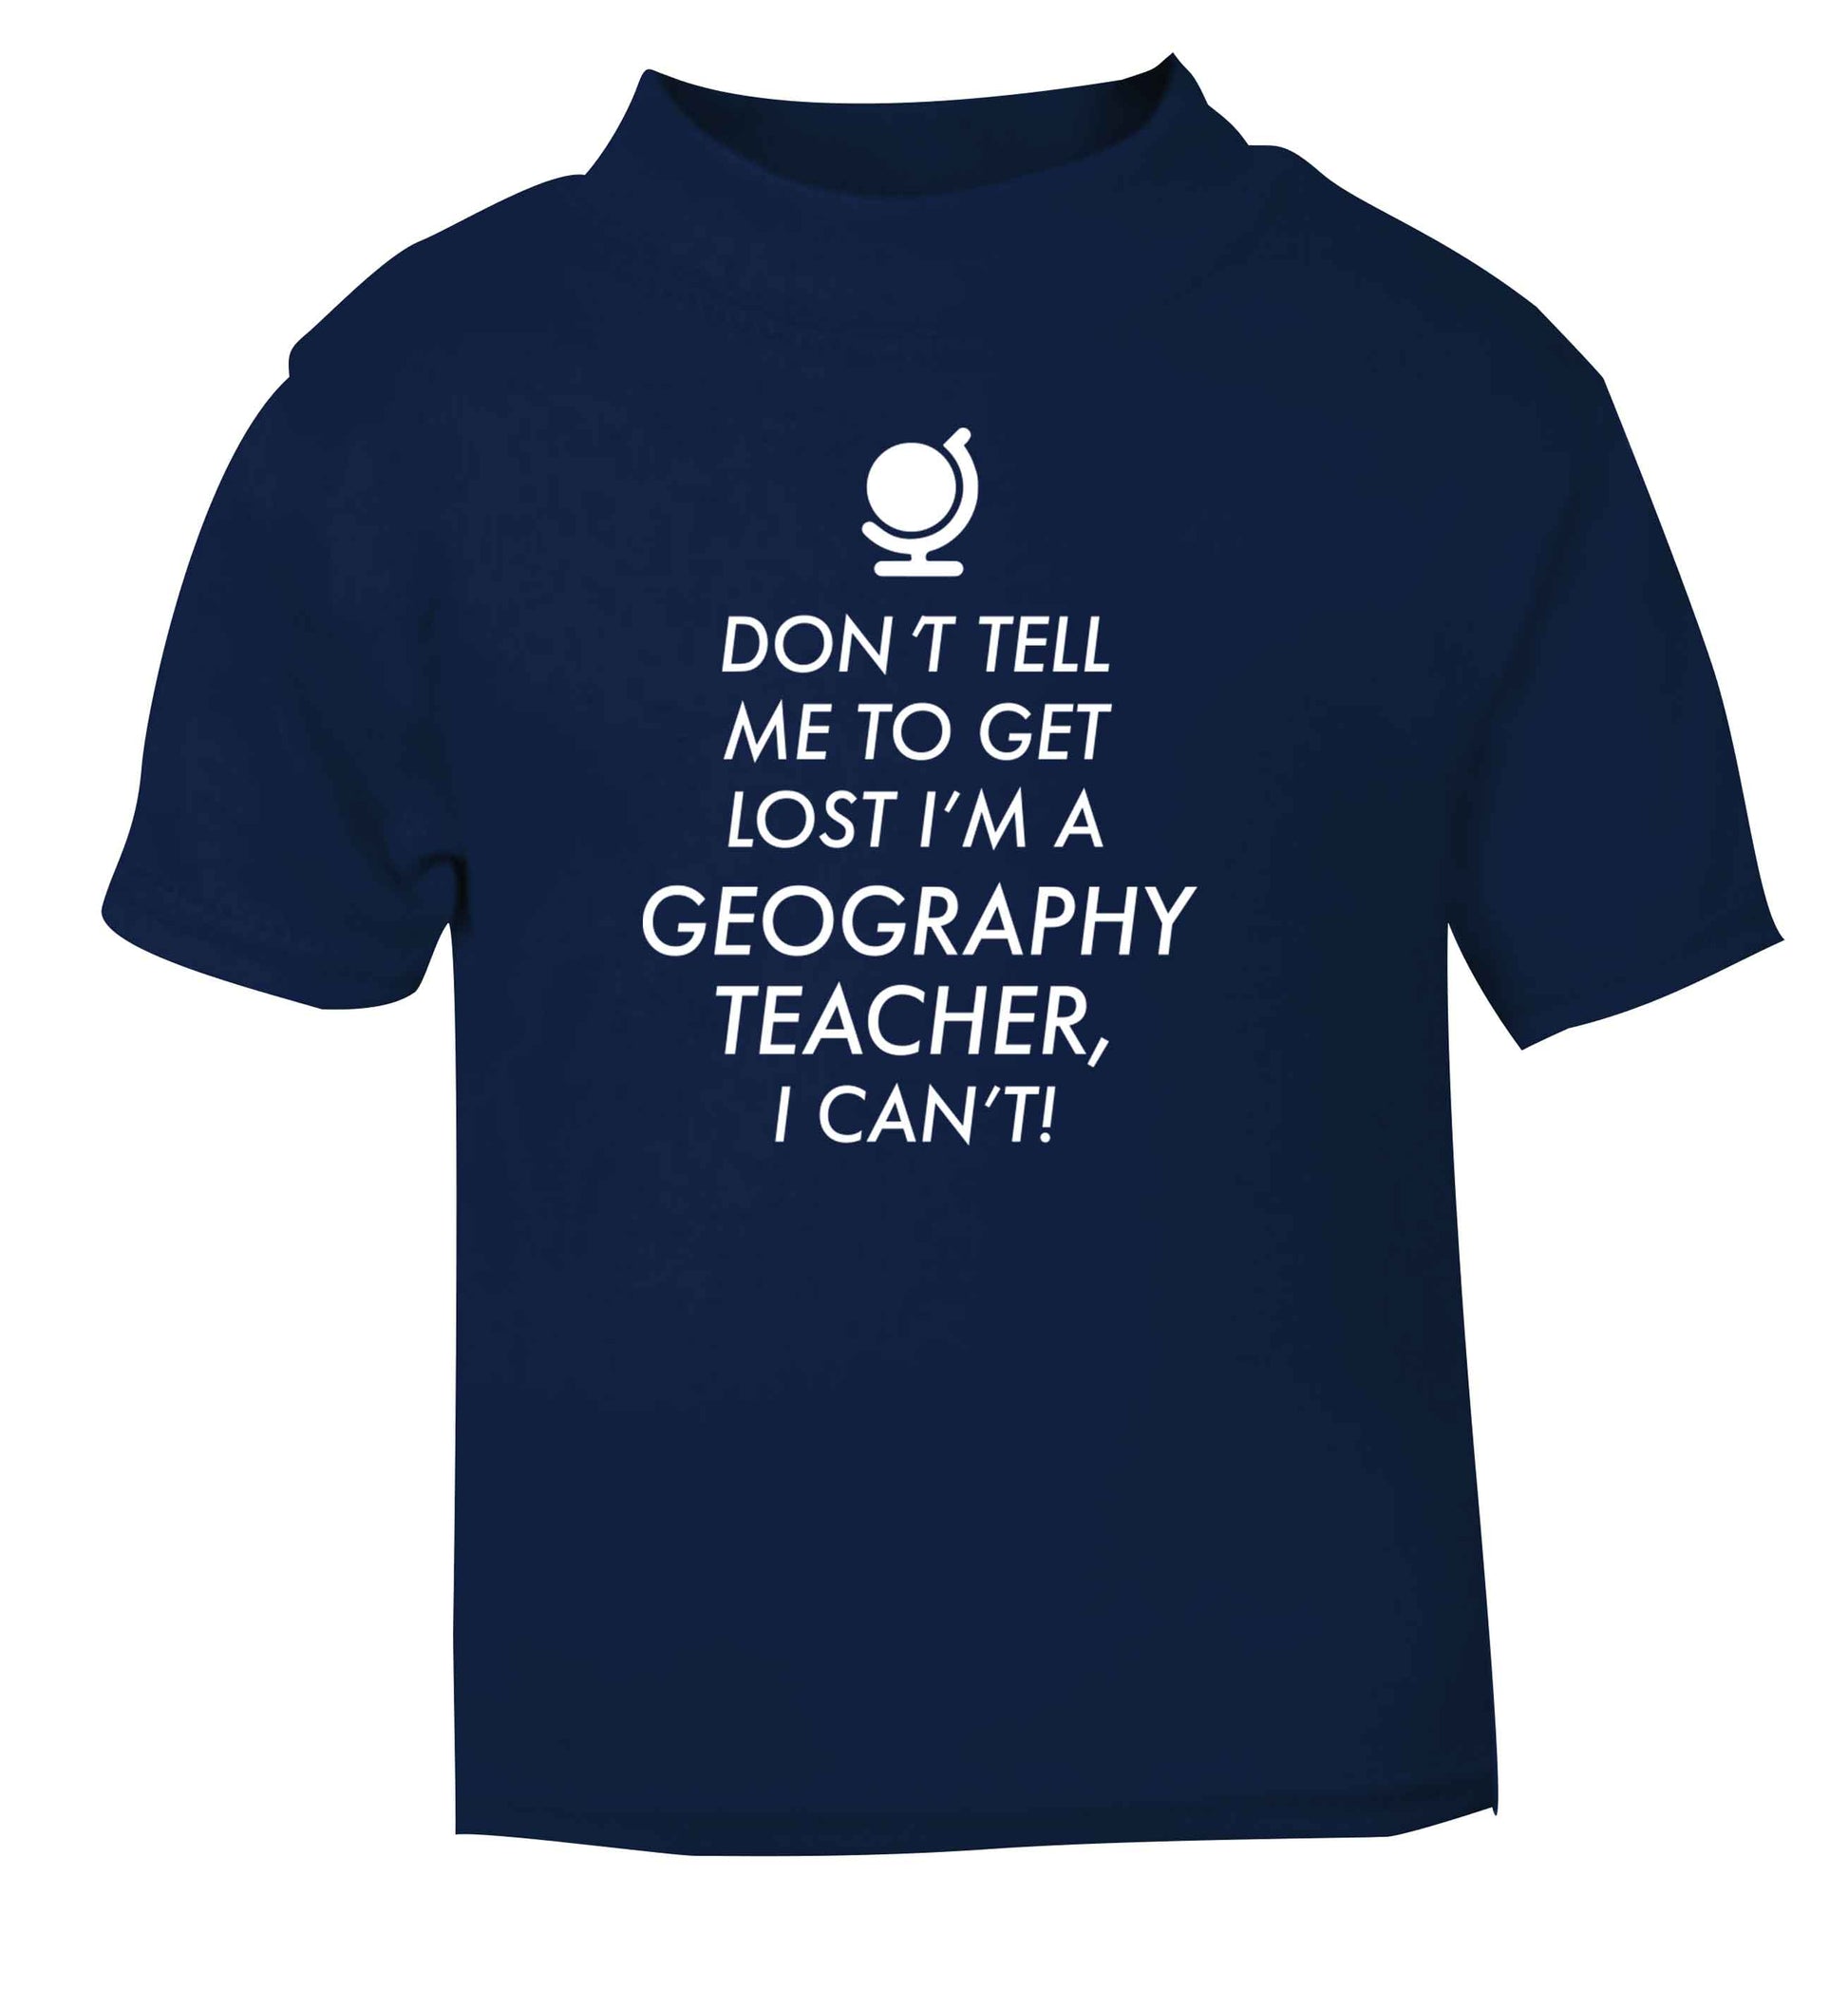 Don't tell me to get lost I'm a geography teacher, I can't navy Baby Toddler Tshirt 2 Years